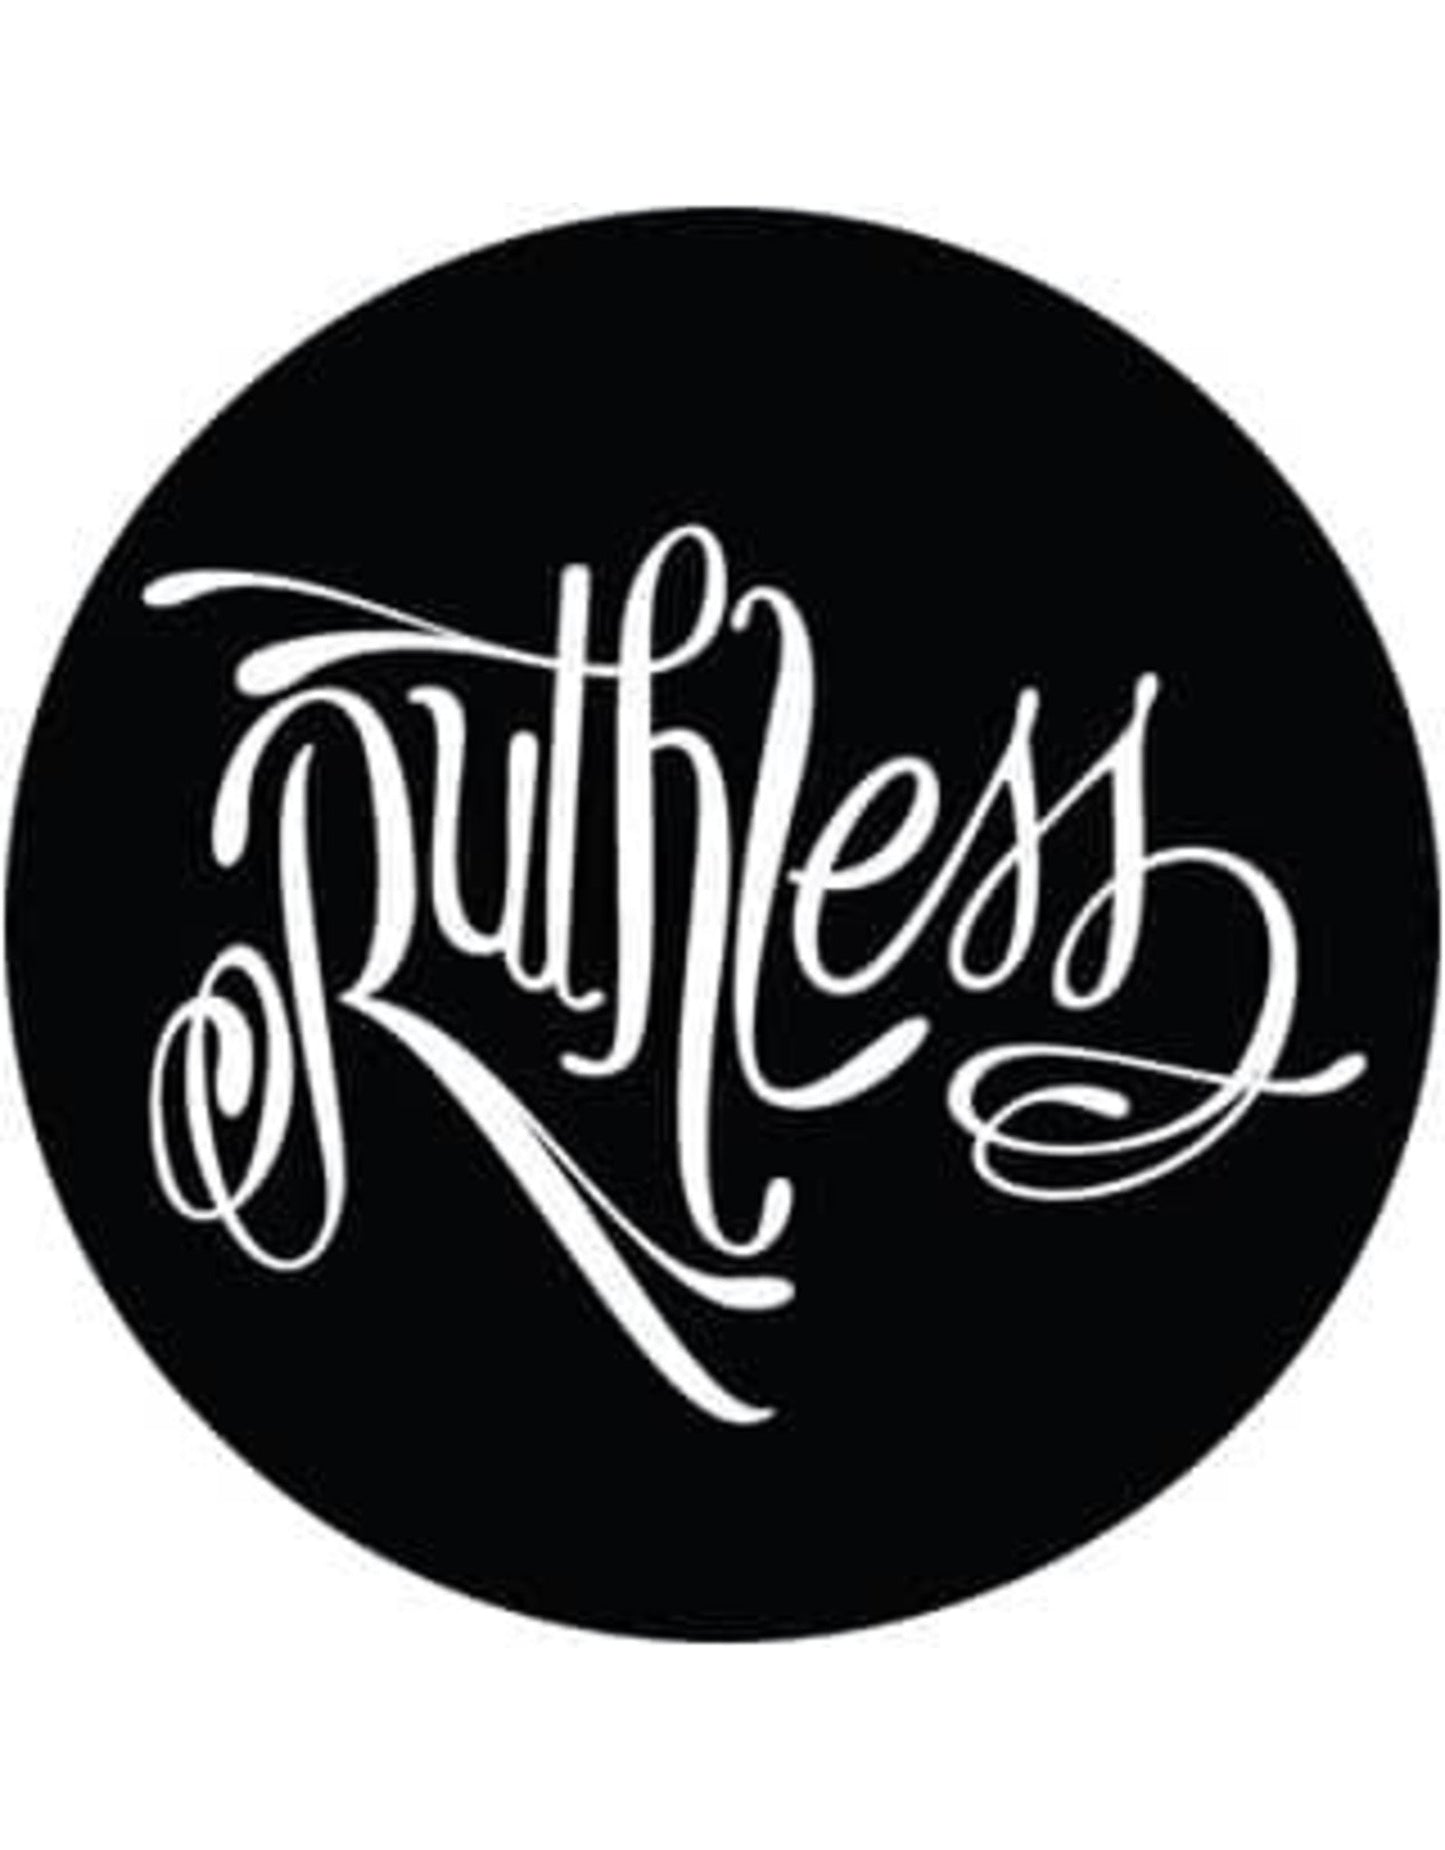 Ruthless - Strizzy